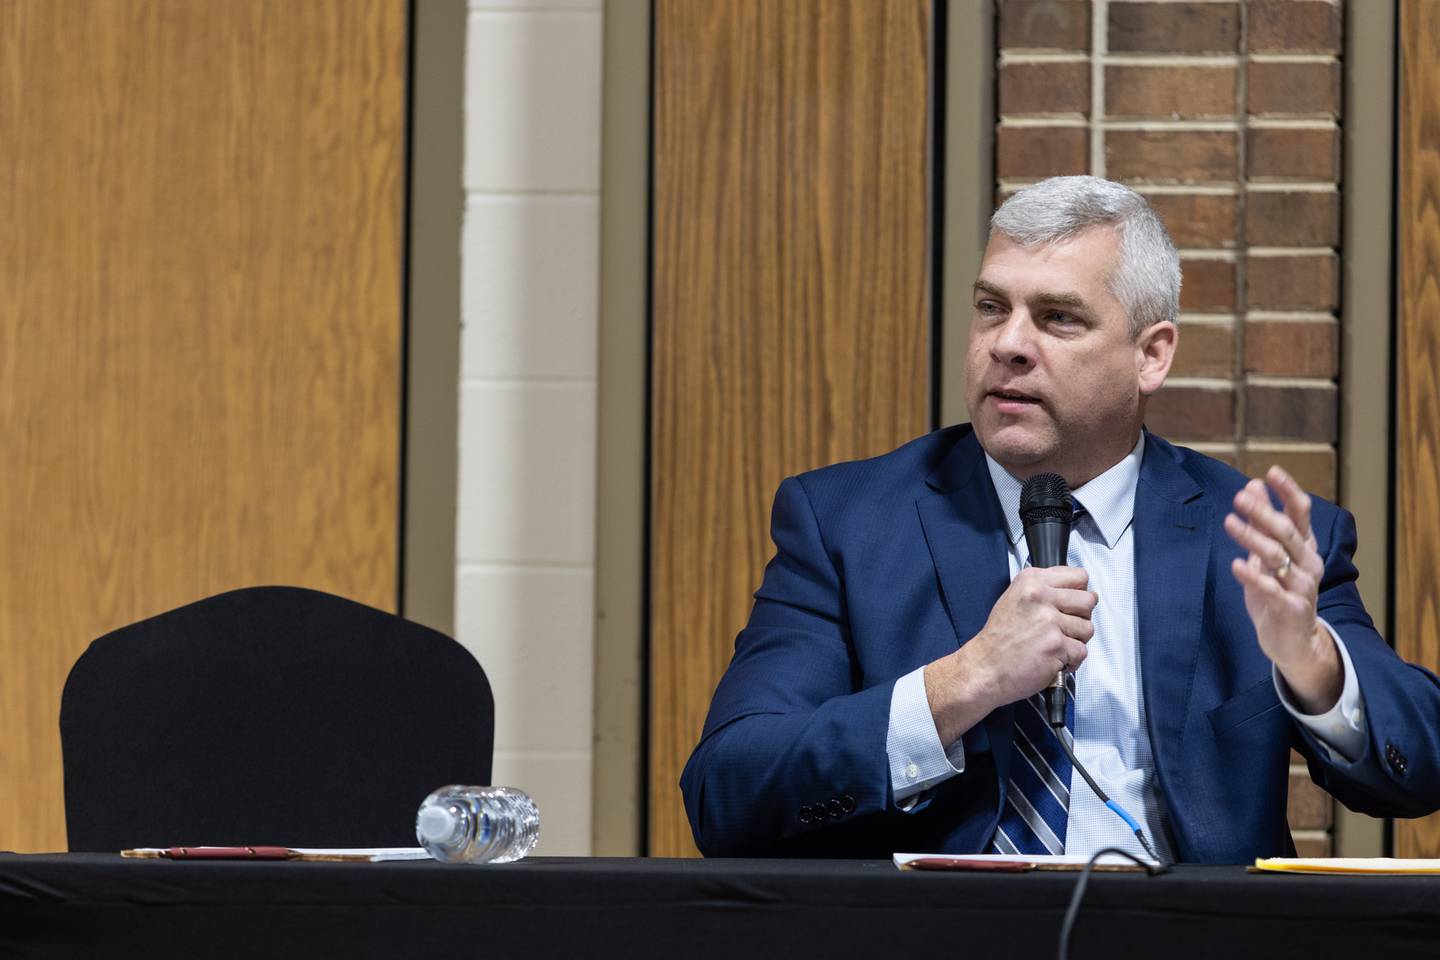 Incumbent-mayor Bob O'Dekirk speaks at a Joliet Mayoral Forum hosted by the the National Hook-up of Black Women, in Joliet on Saturday, Feb. 18, 2023.